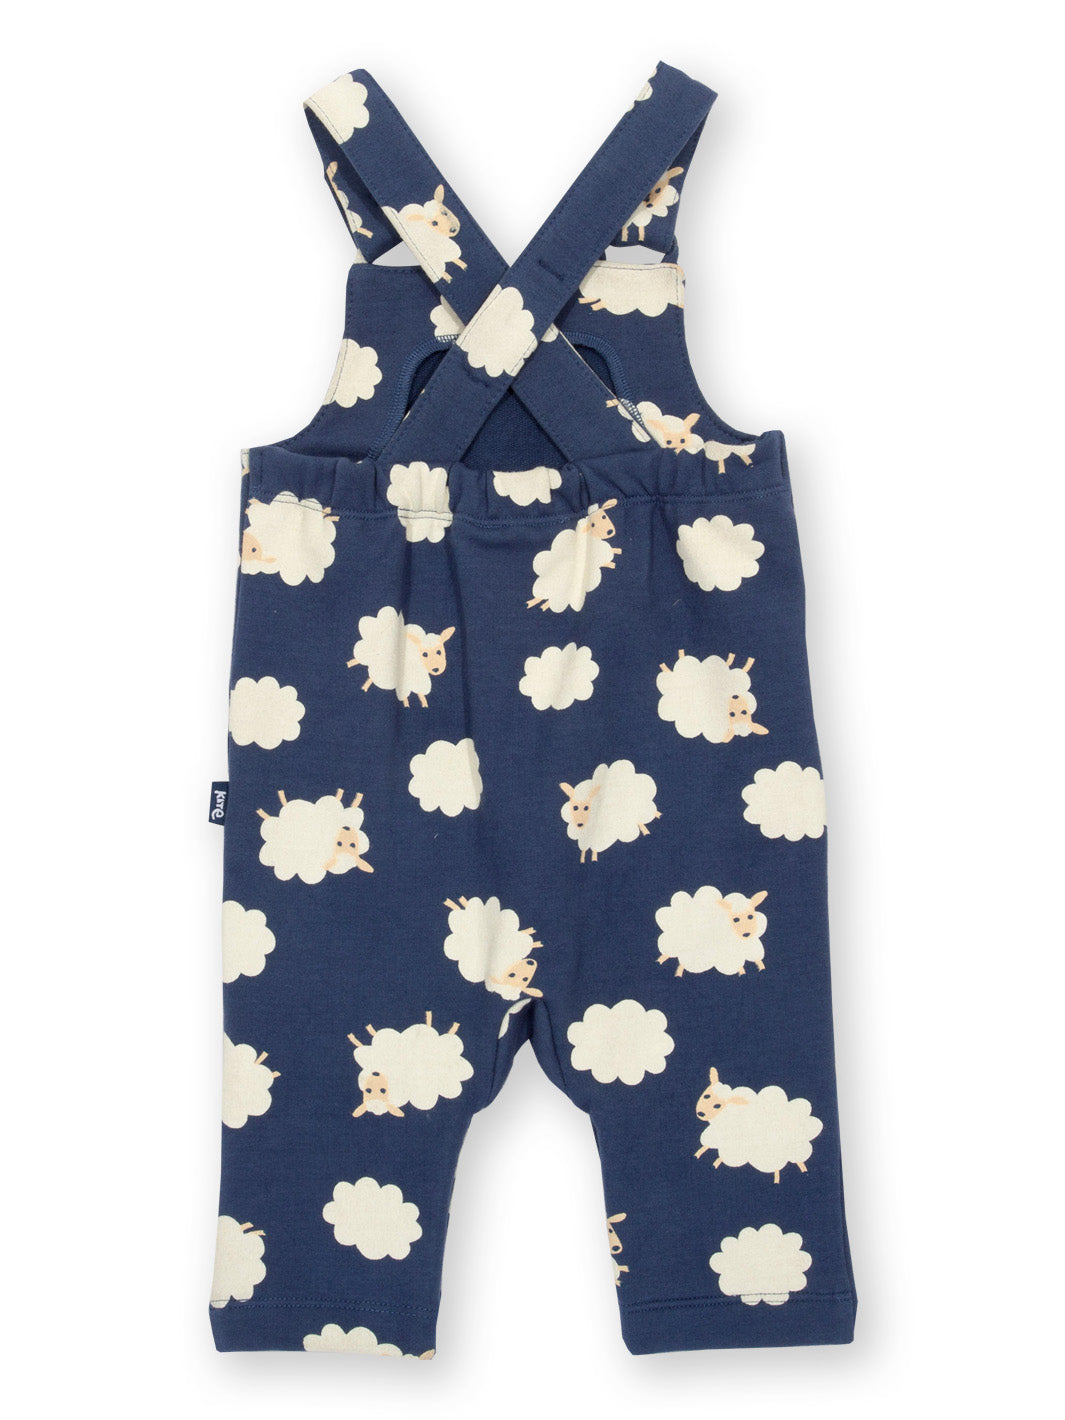 Kite Sheepy Clouds Dungarees SALE